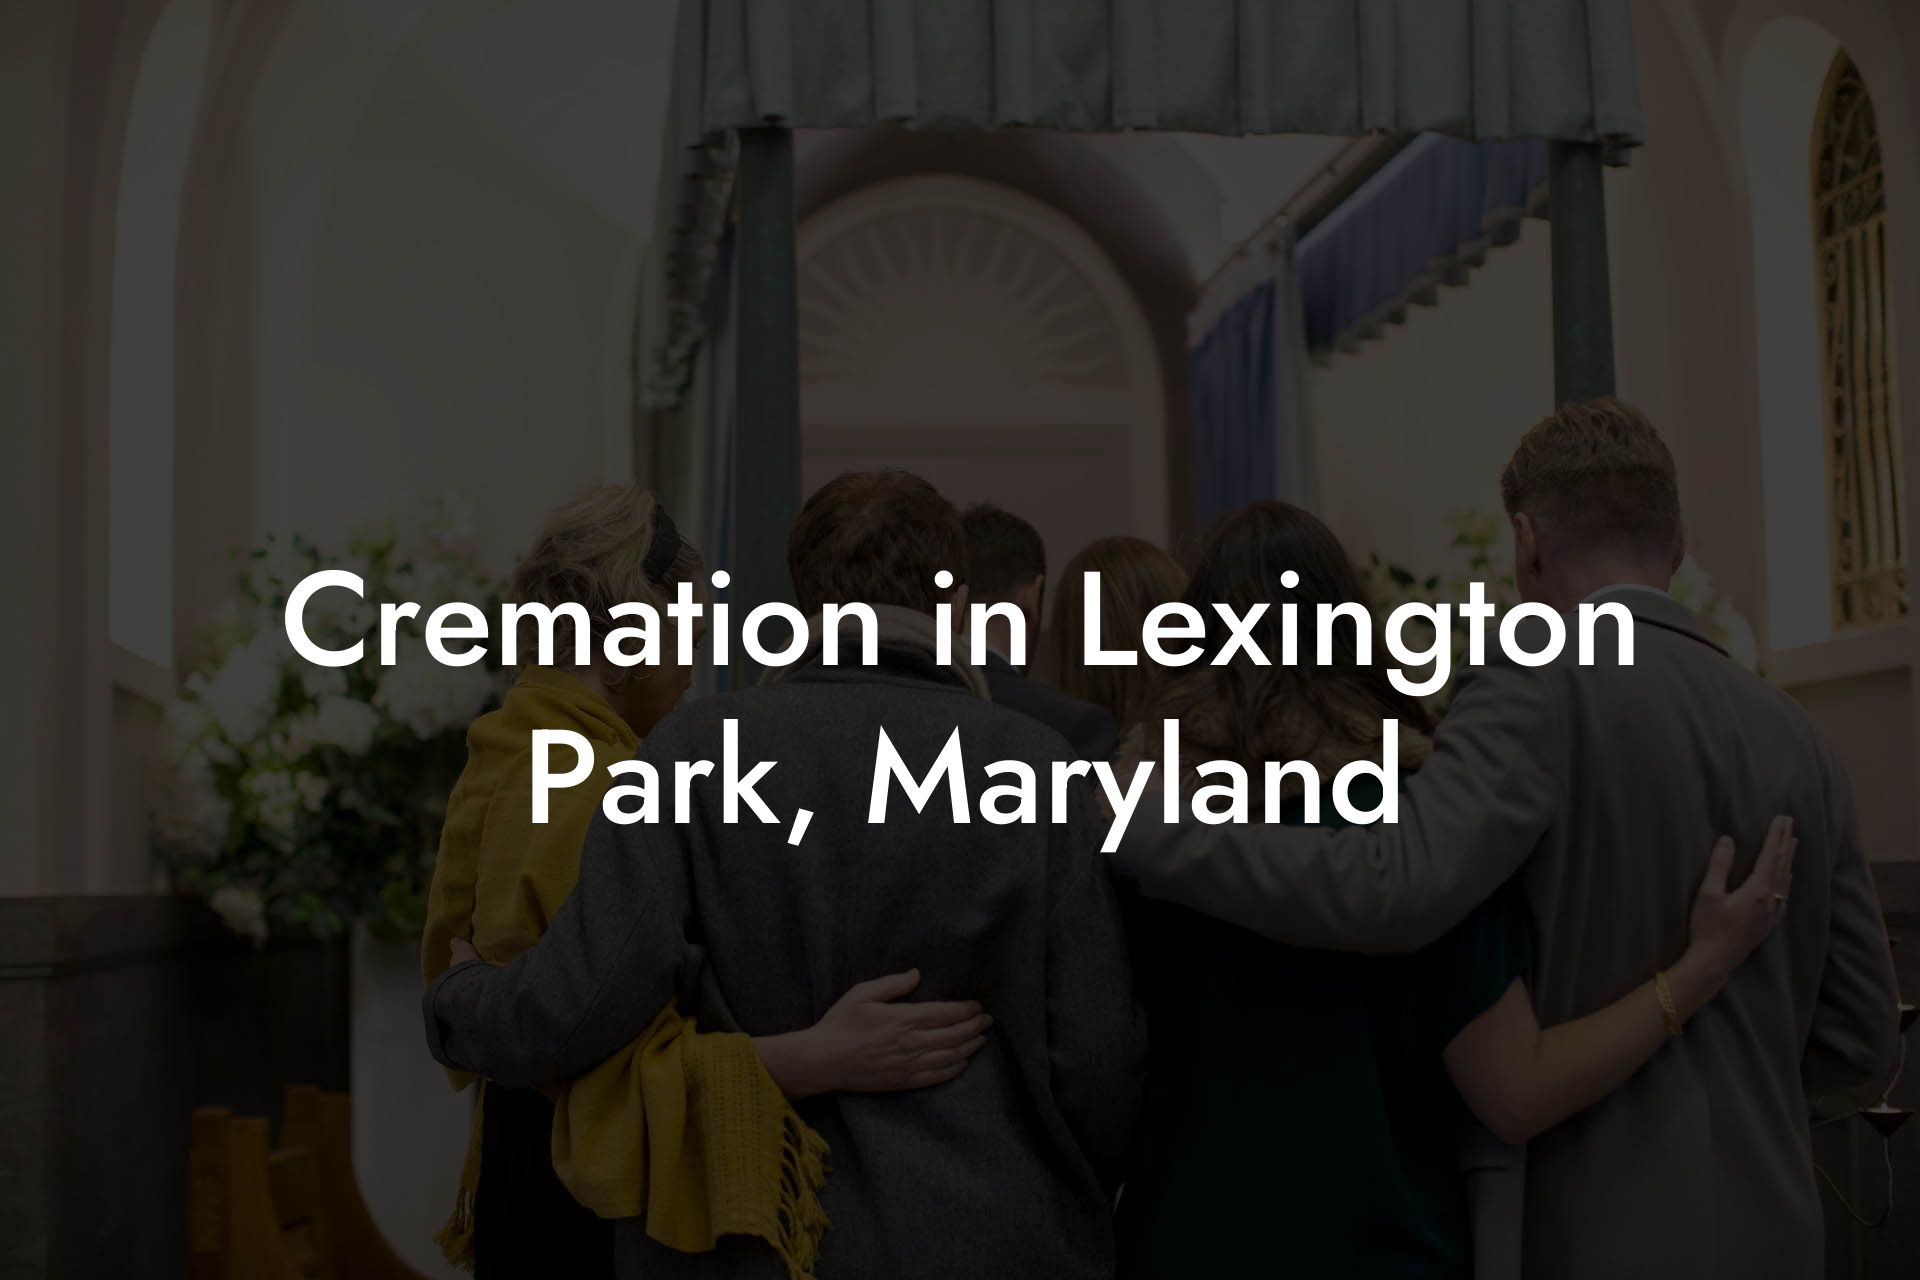 Cremation in Lexington Park, Maryland